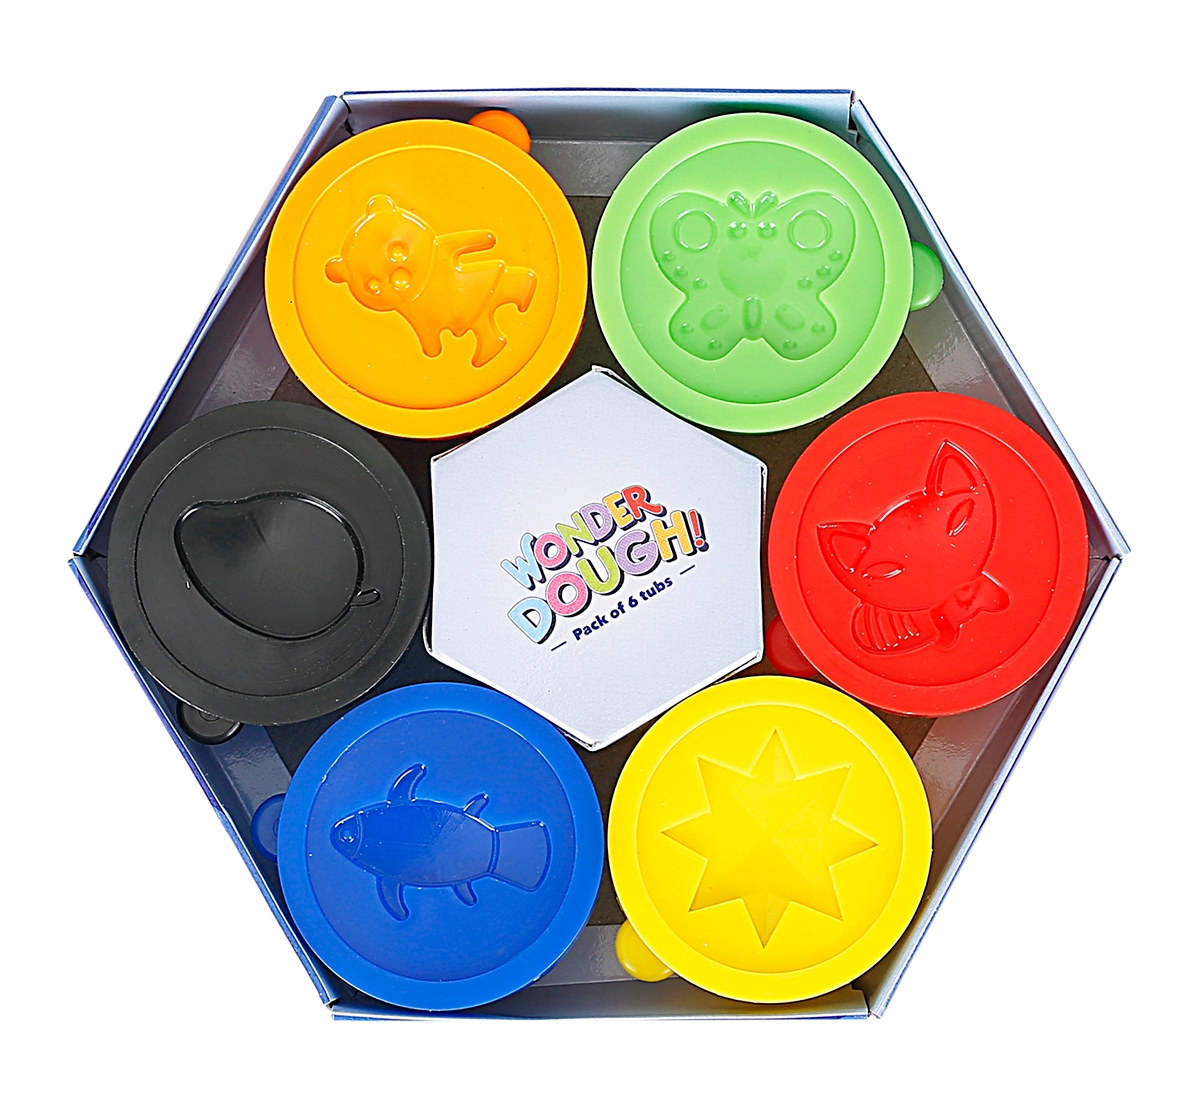 Youreka | Youreka Hex Dough 6 Shades 25g Clay Toy for Kids 3Y+, Multicolour